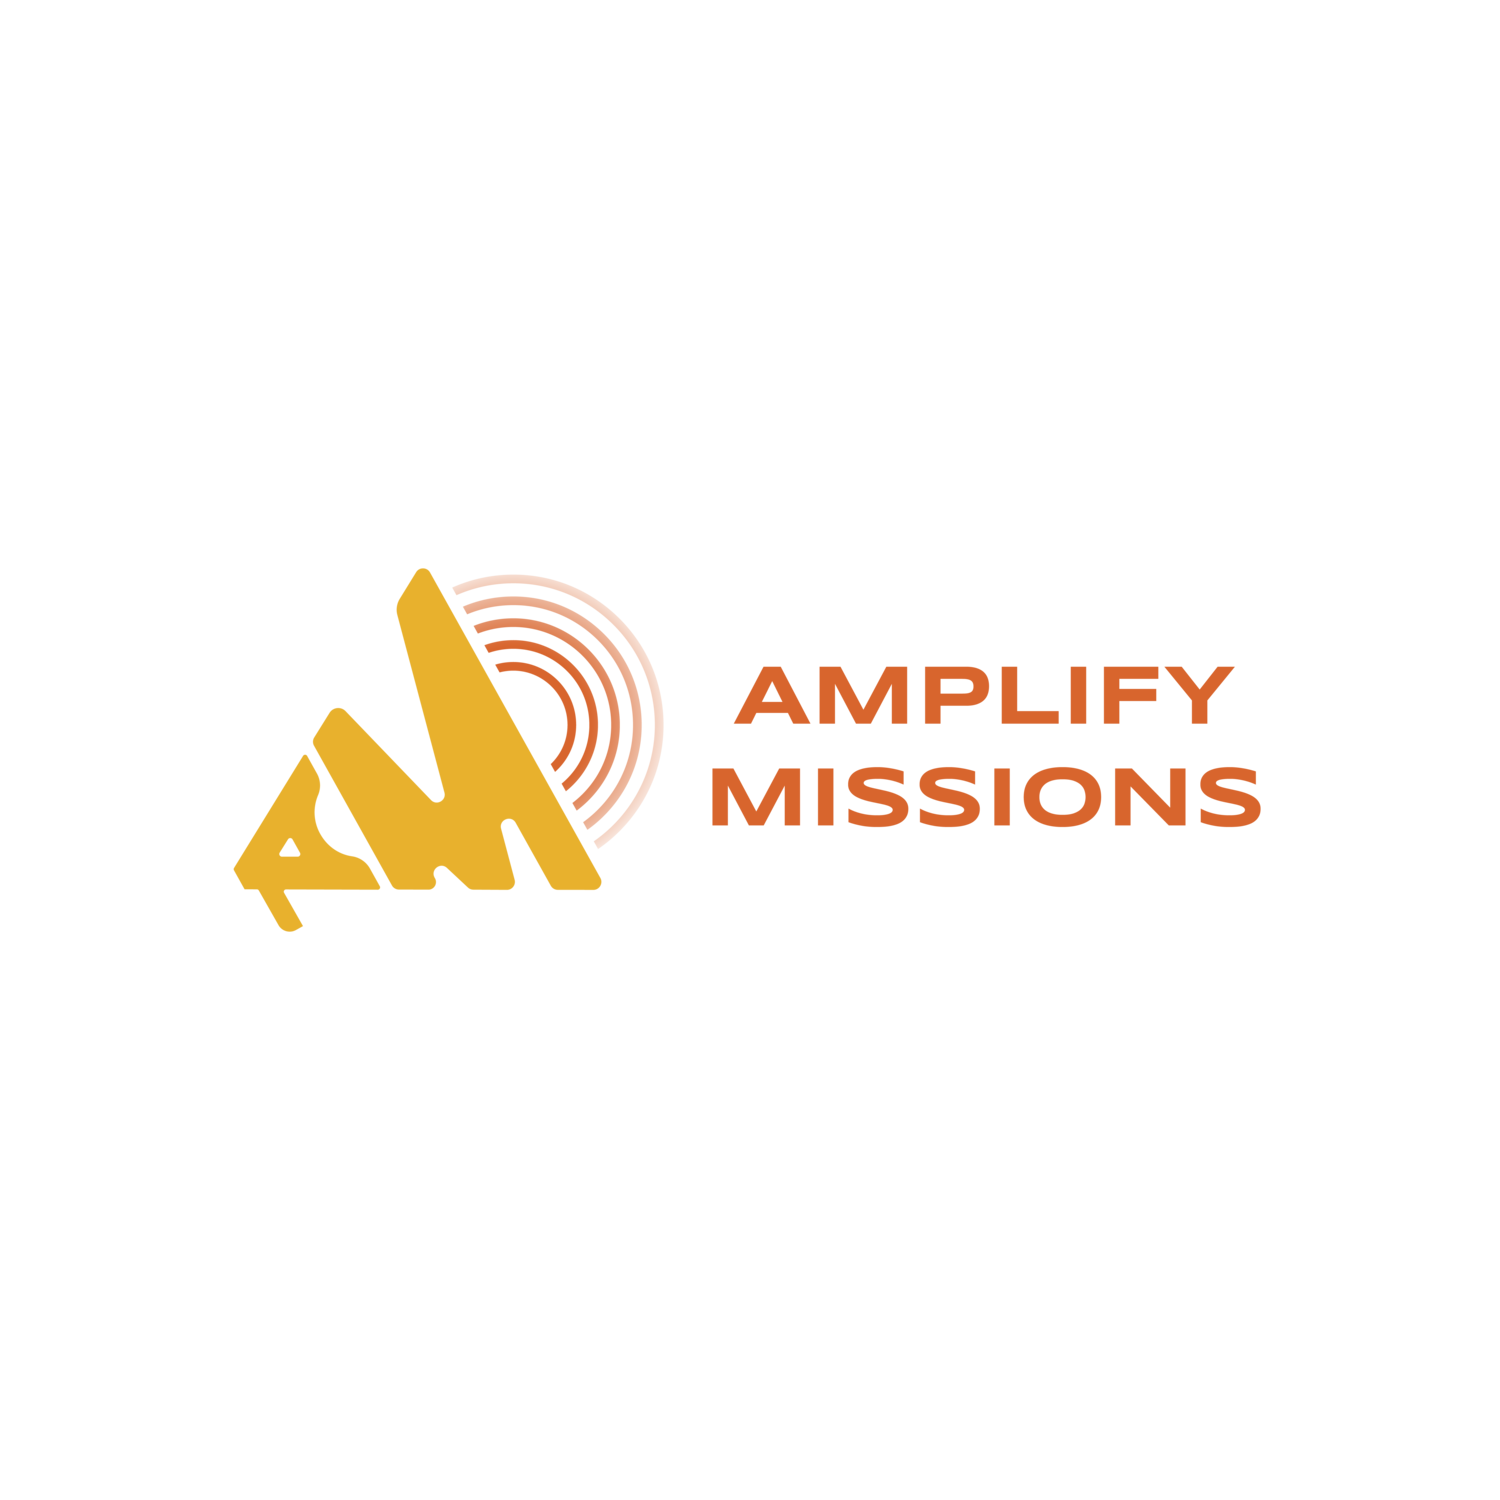 Amplify Missions